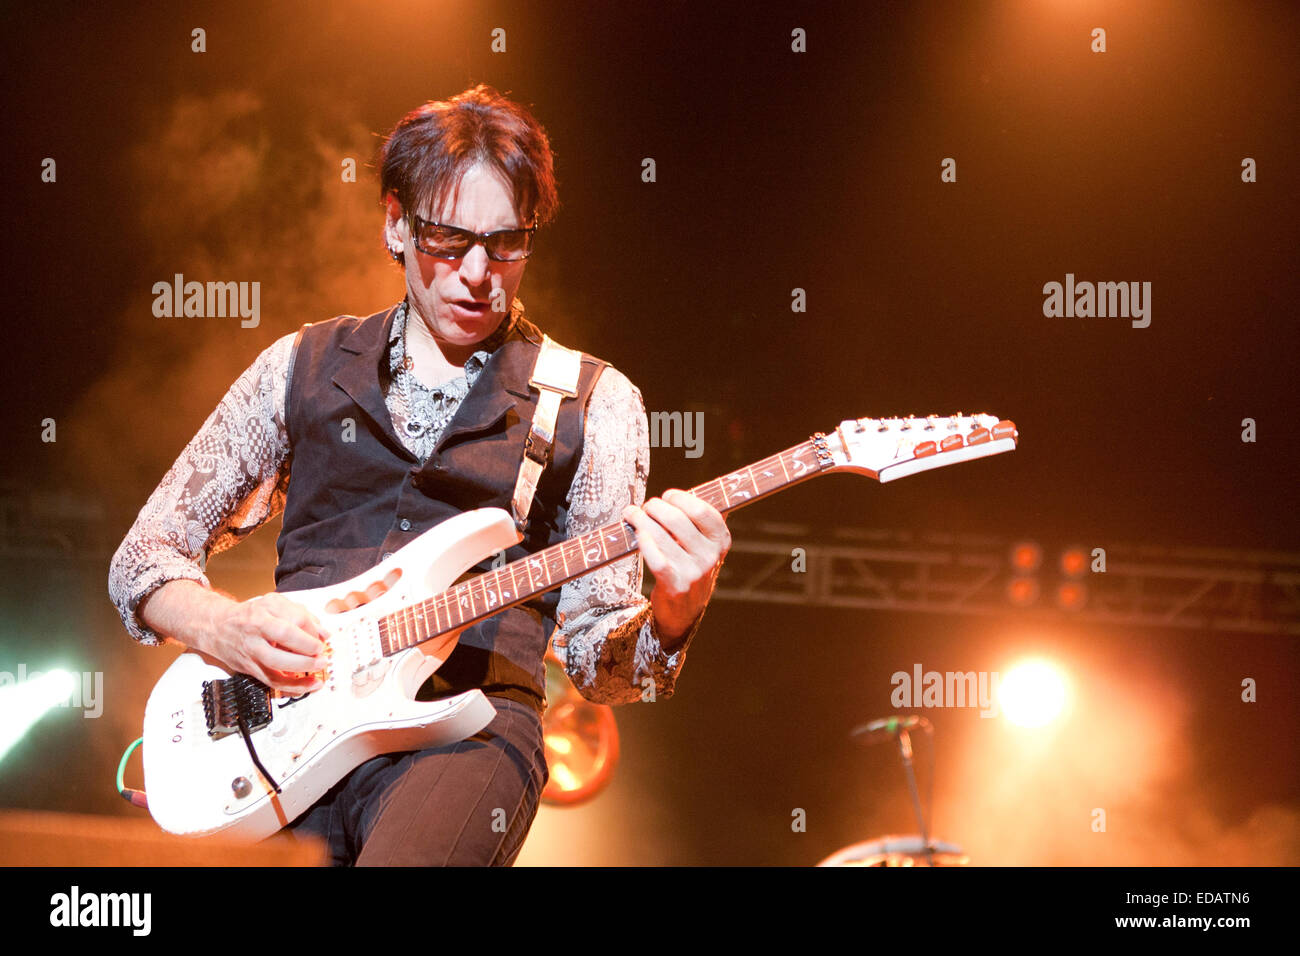 Steve Vai performed at Sportarena stage, Budapest, Hungary Aug 01, 2012 Stock Photo